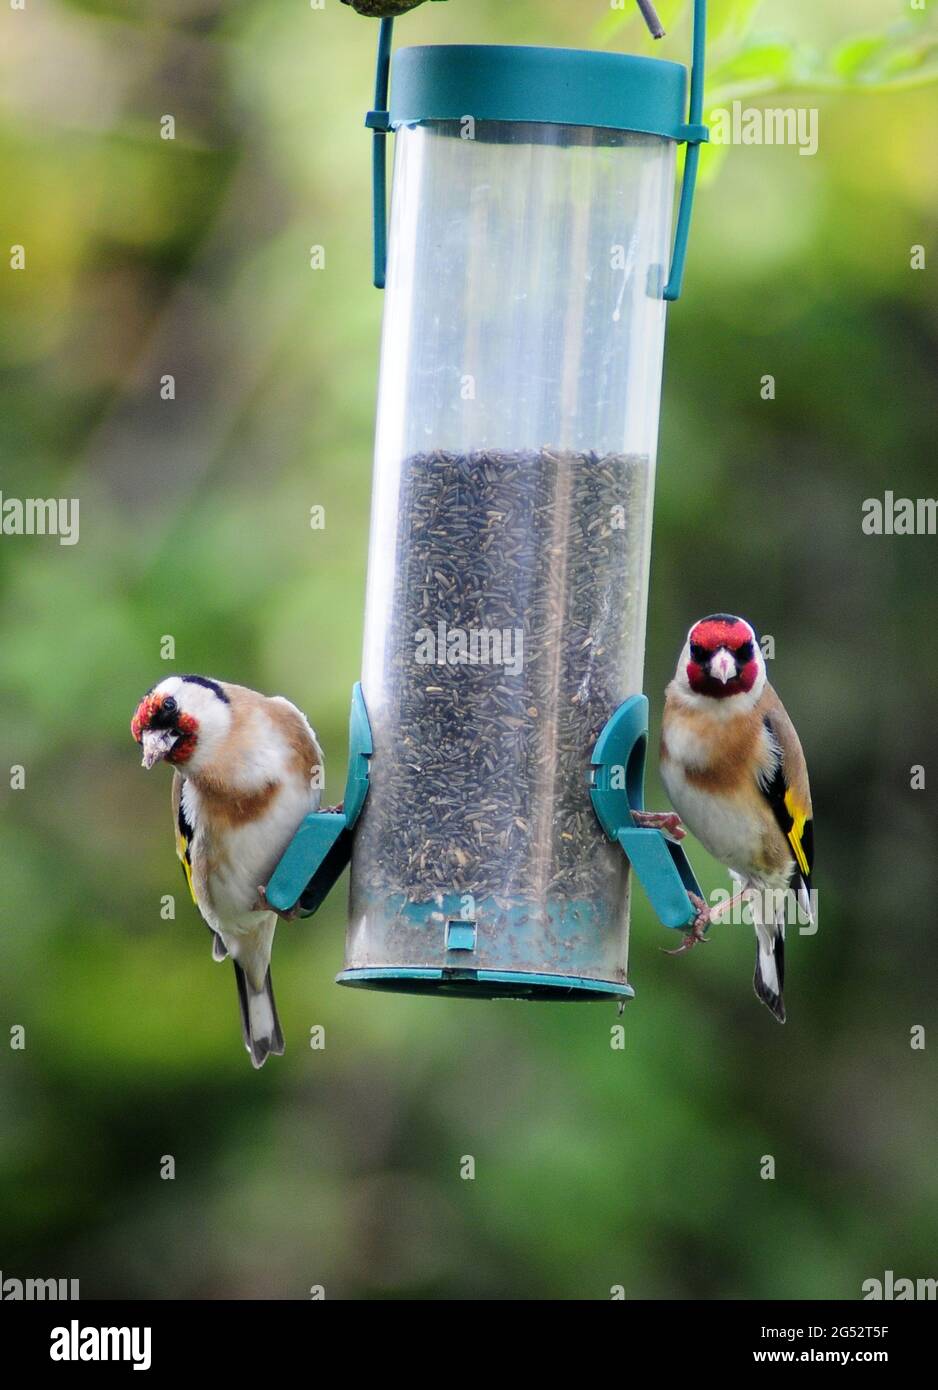 Goldfinches feeding on Nyjer seed feeder. Stock Photo